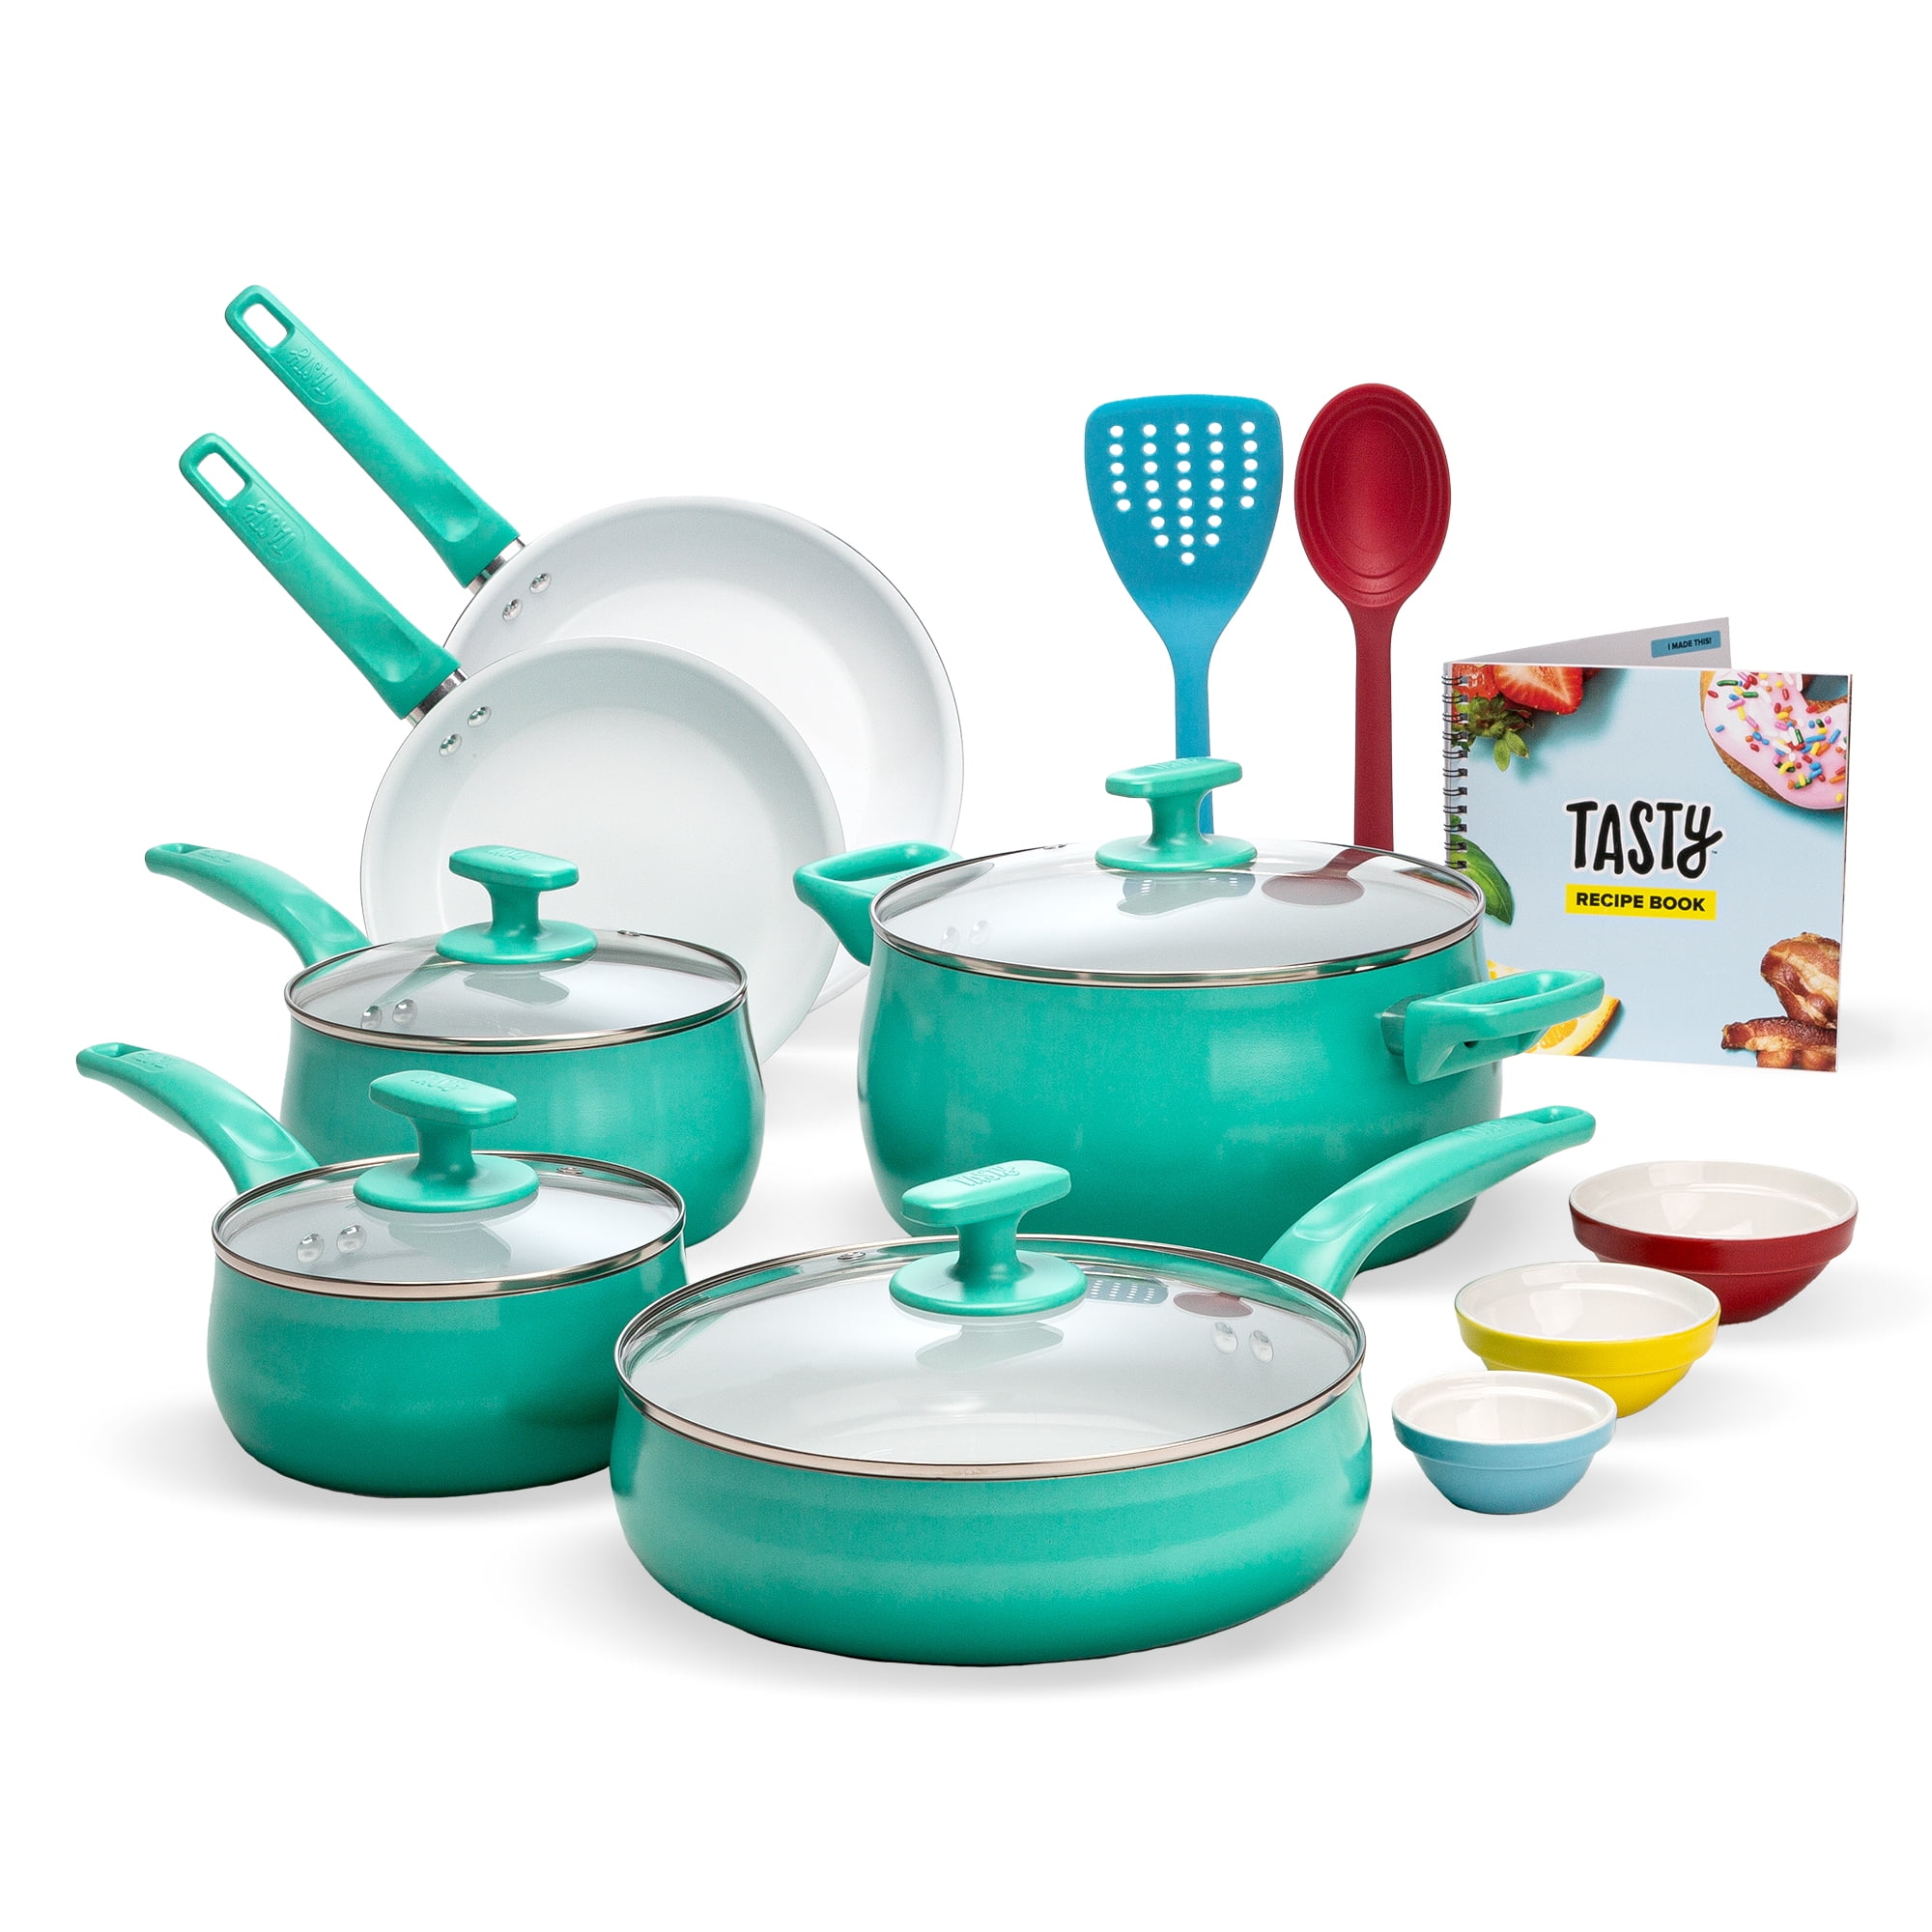 GoodCook Healthy Ceramic Titanium-infused 10-Piece Cookware Set with tools,  Light Blue - GoodCook